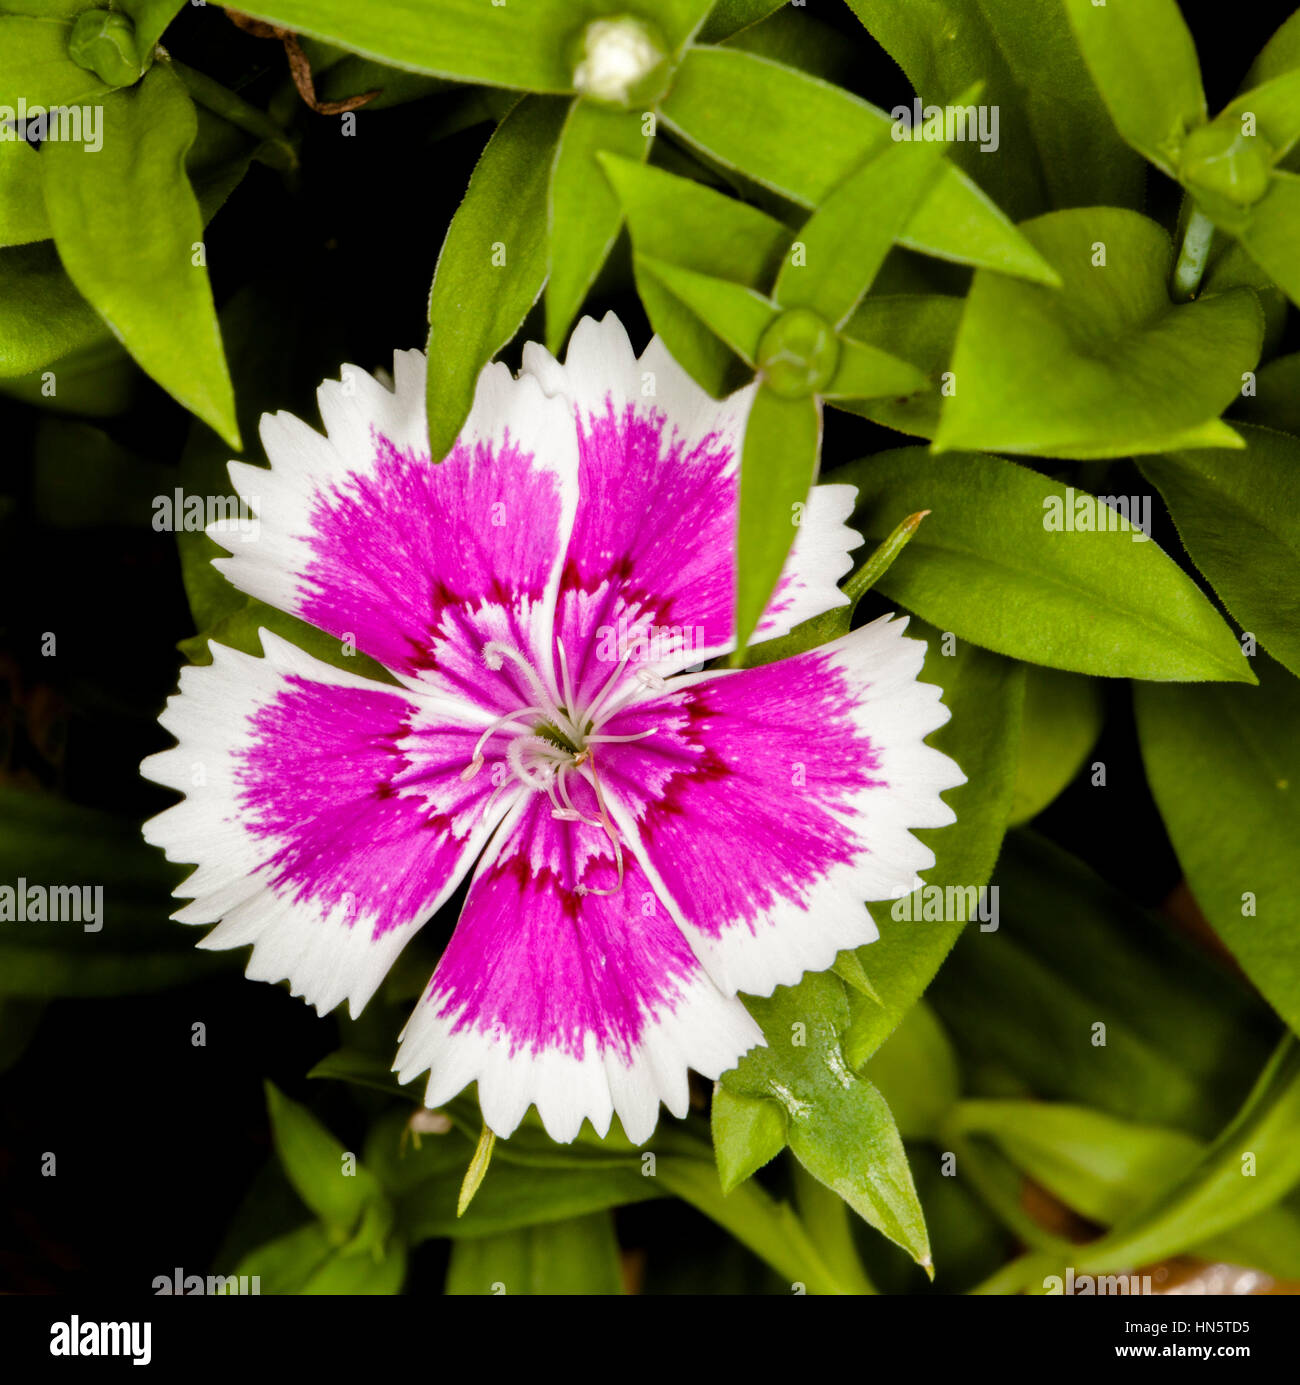 Beautiful deep pink perfumed flower of Dianthus barbartus with white edges to petals among bright green leaves Stock Photo